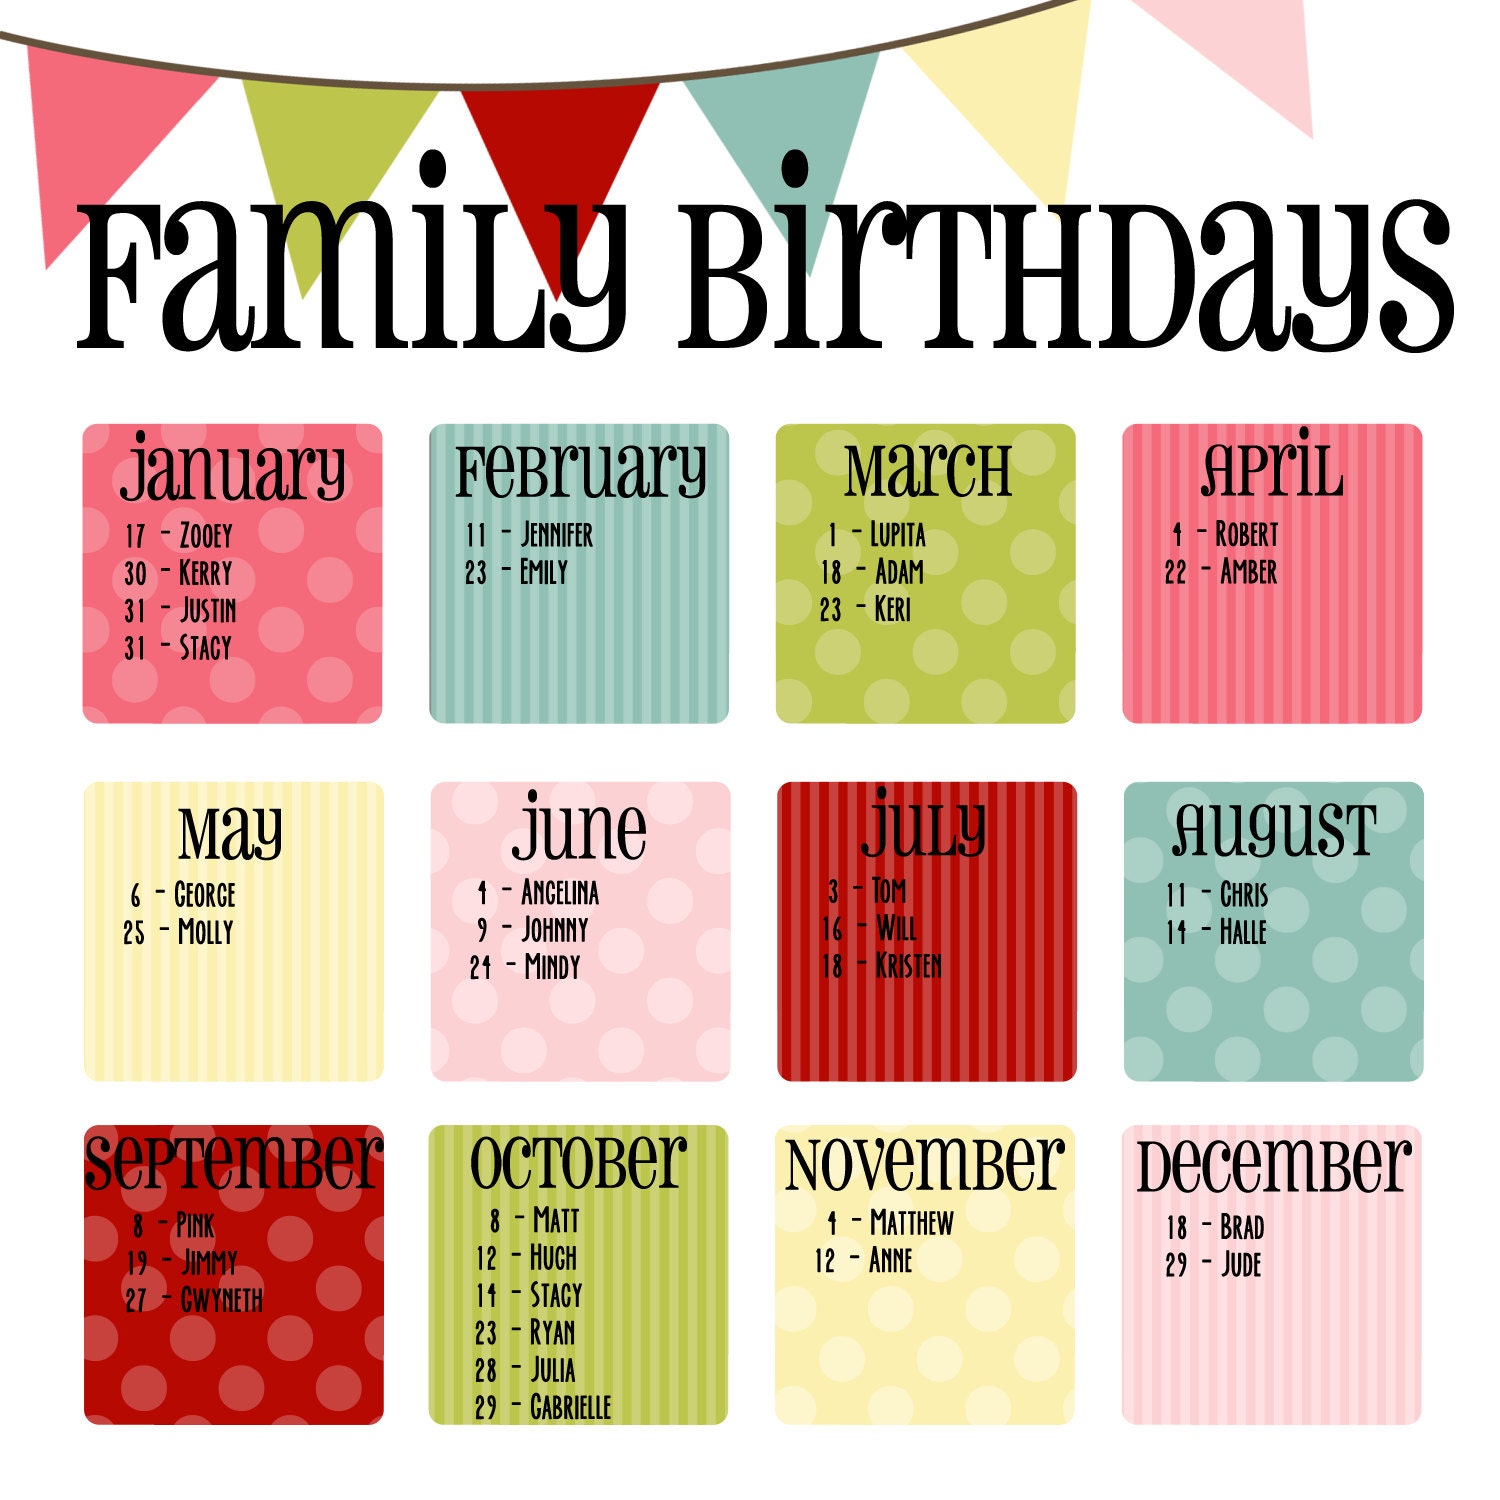 how to fillable birthday calendar template excel get your calendar